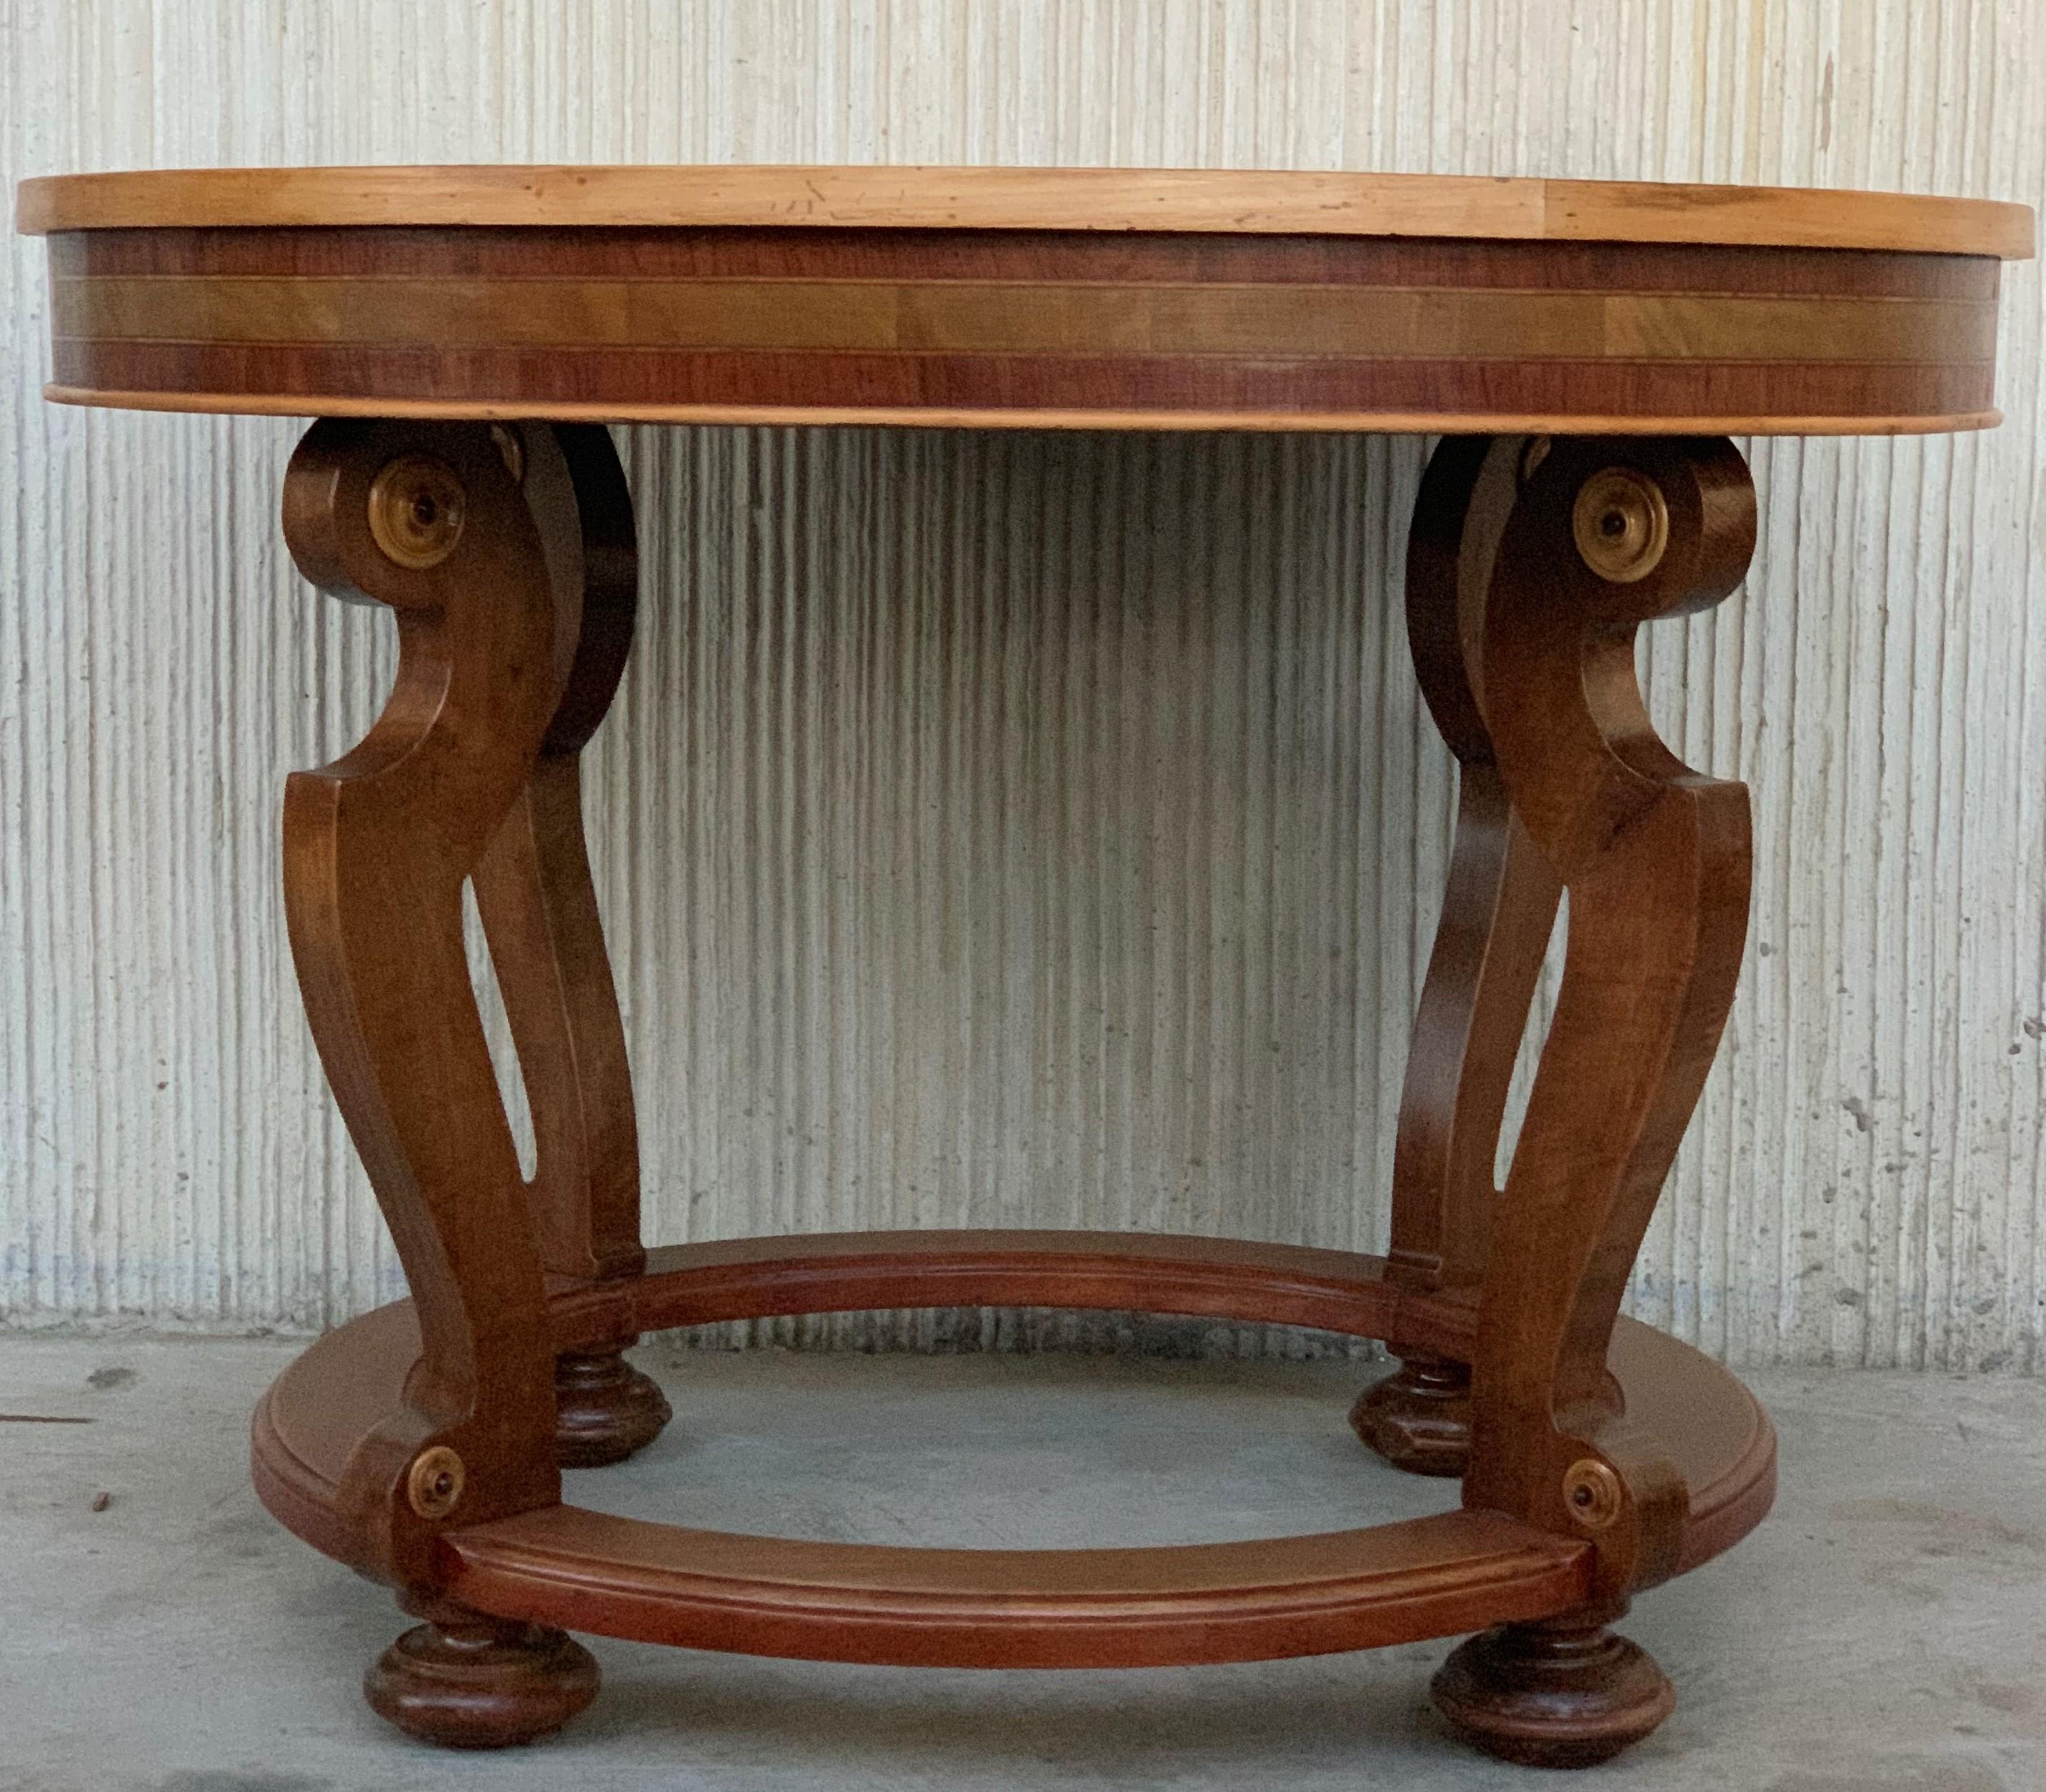 20th marquetry round center table with four cabriole legs.